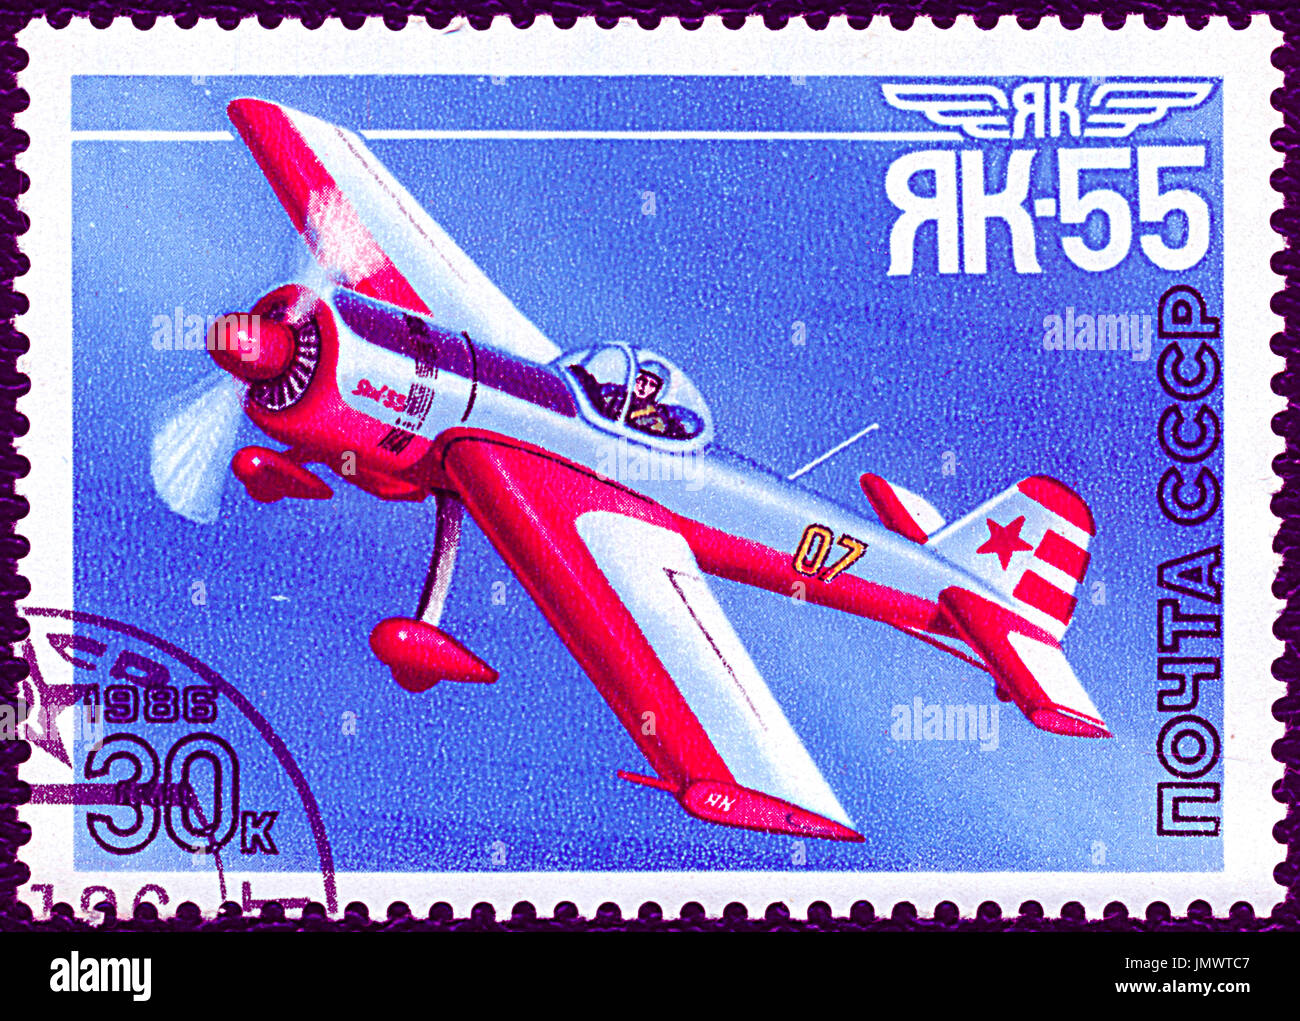 SOVIET UNION - CIRCA 1986: Postage stamp printed in Soviet Union shows vintage airplane YAK-55. Stamp printed by Russian Post circa 1986. Stock Photo